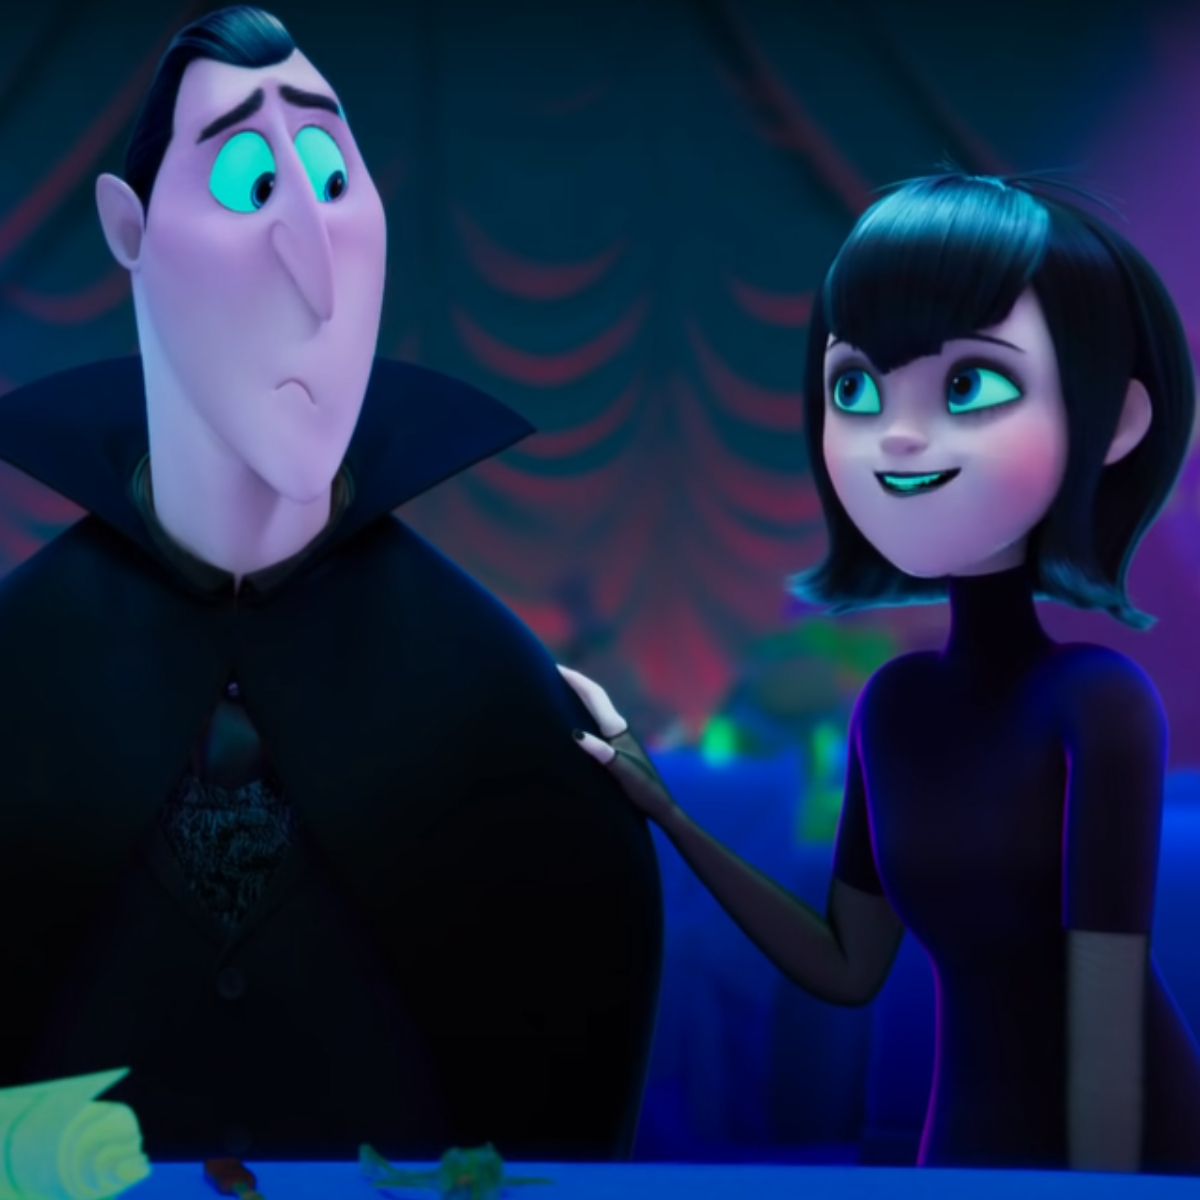 Hotel Transylvania: Transformania Review: Selena Gomez seeks to save a NOISY story with rushed ending